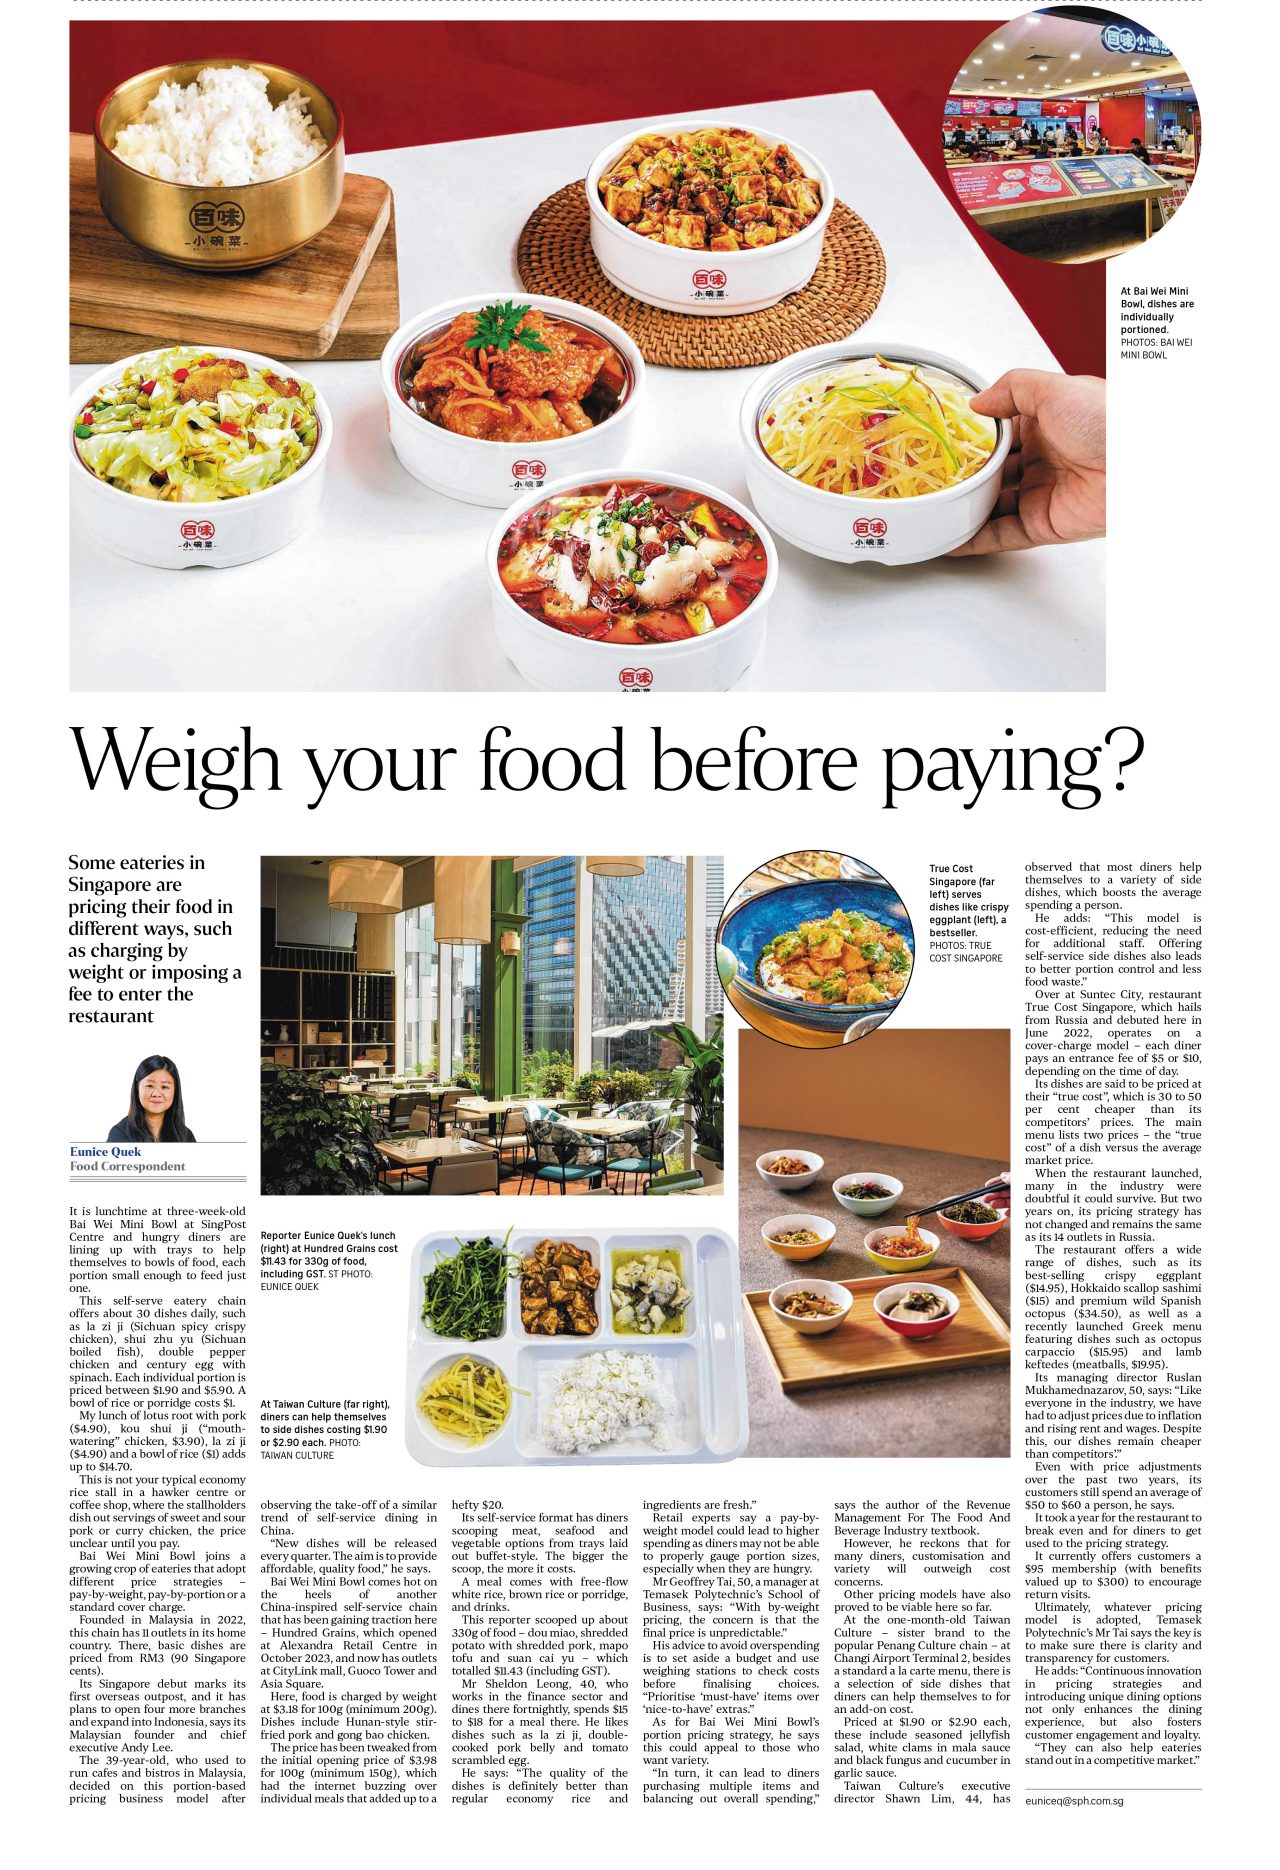 Weigh your food before paying?